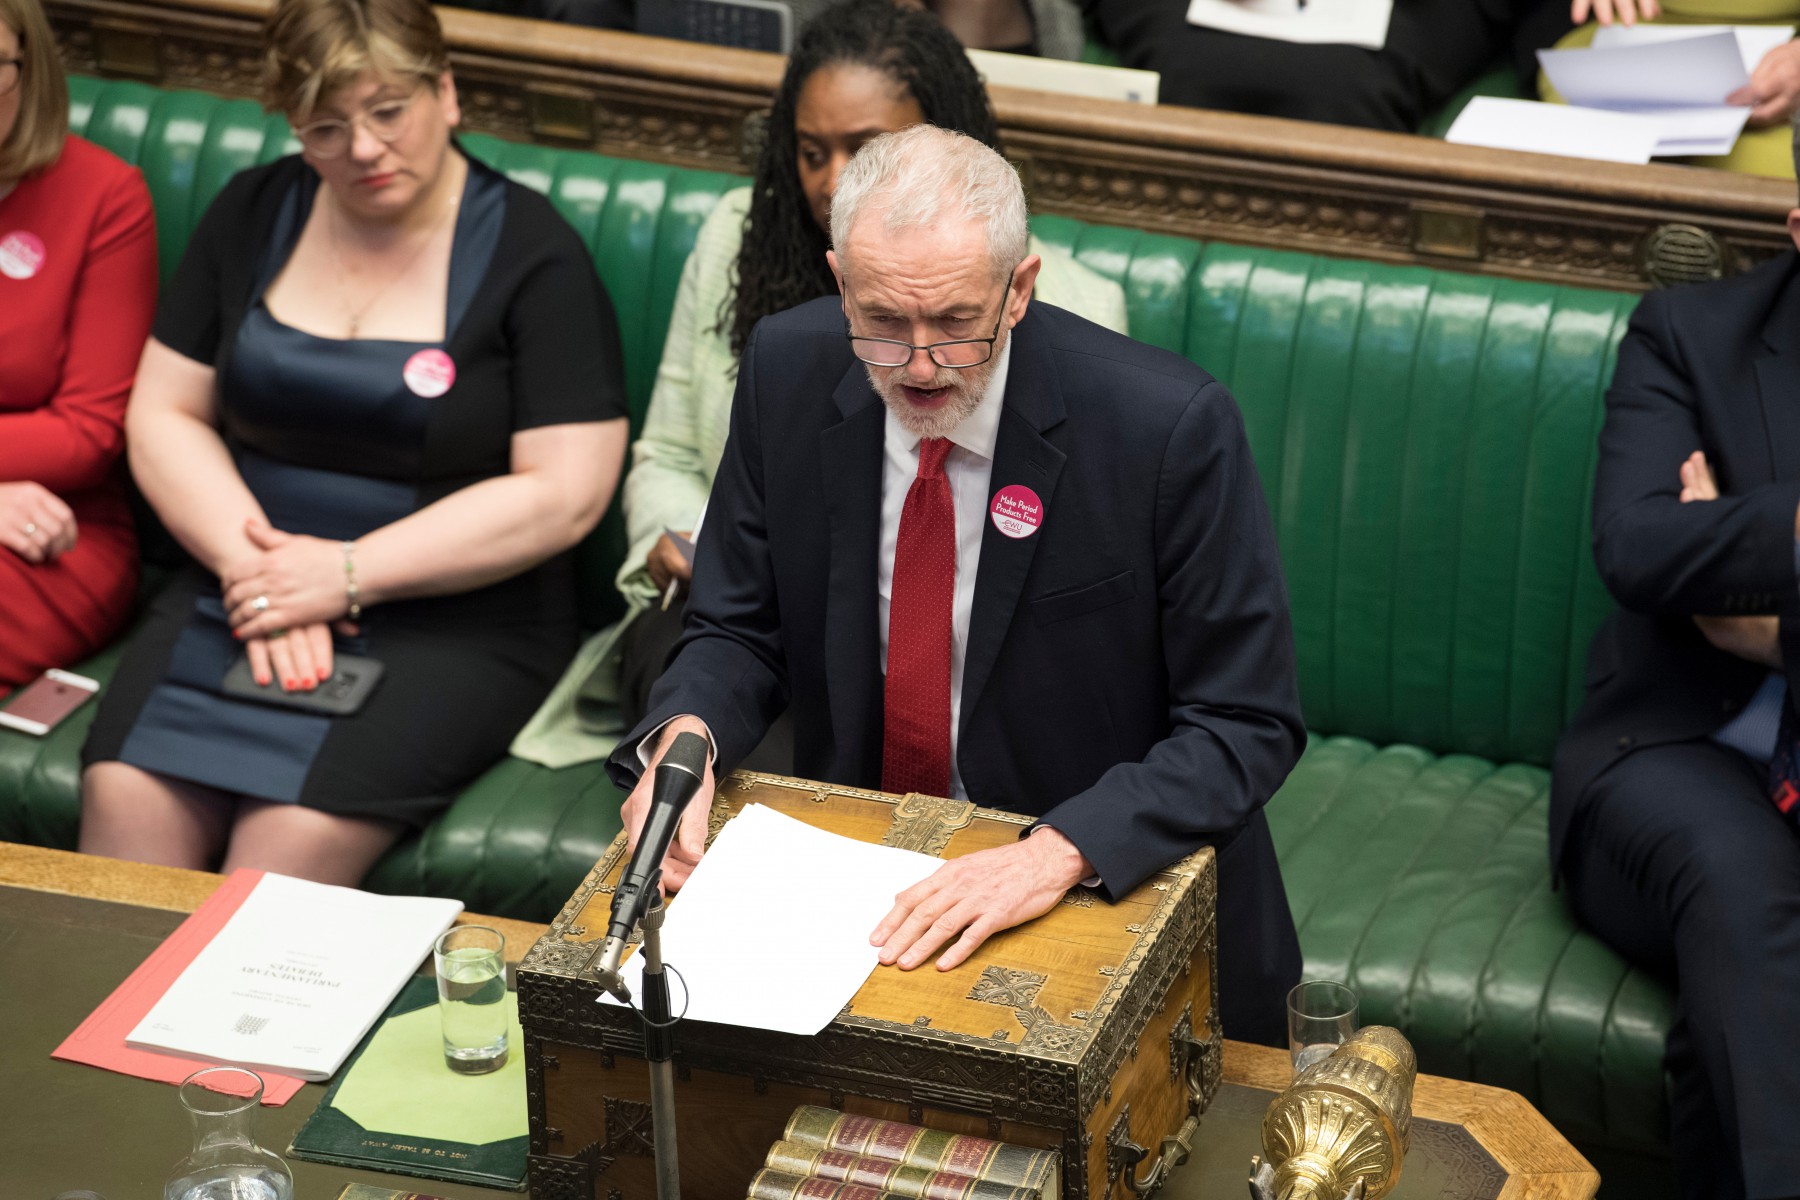 Jeremy Corbyn said 'The House has definitely ruled out no deal'